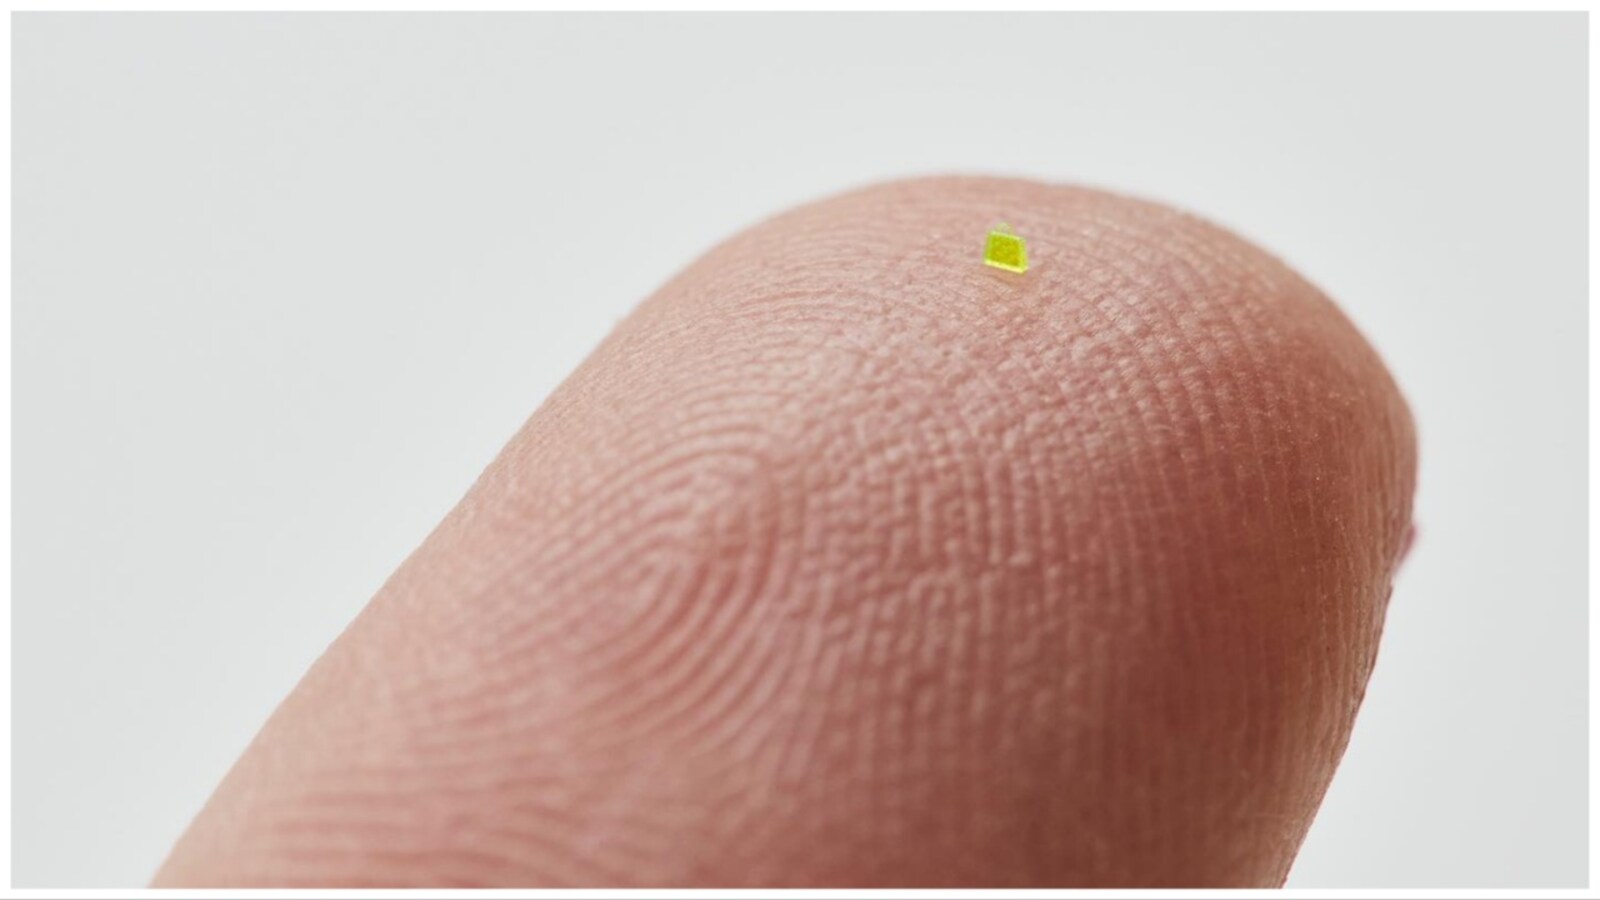 India Today - A minuscule bag, 'smaller than a grain of salt', has been  sold for Rs 51 lacs at an online auction, according to reports. The microscopic  bag is fluorescent yellowish-green